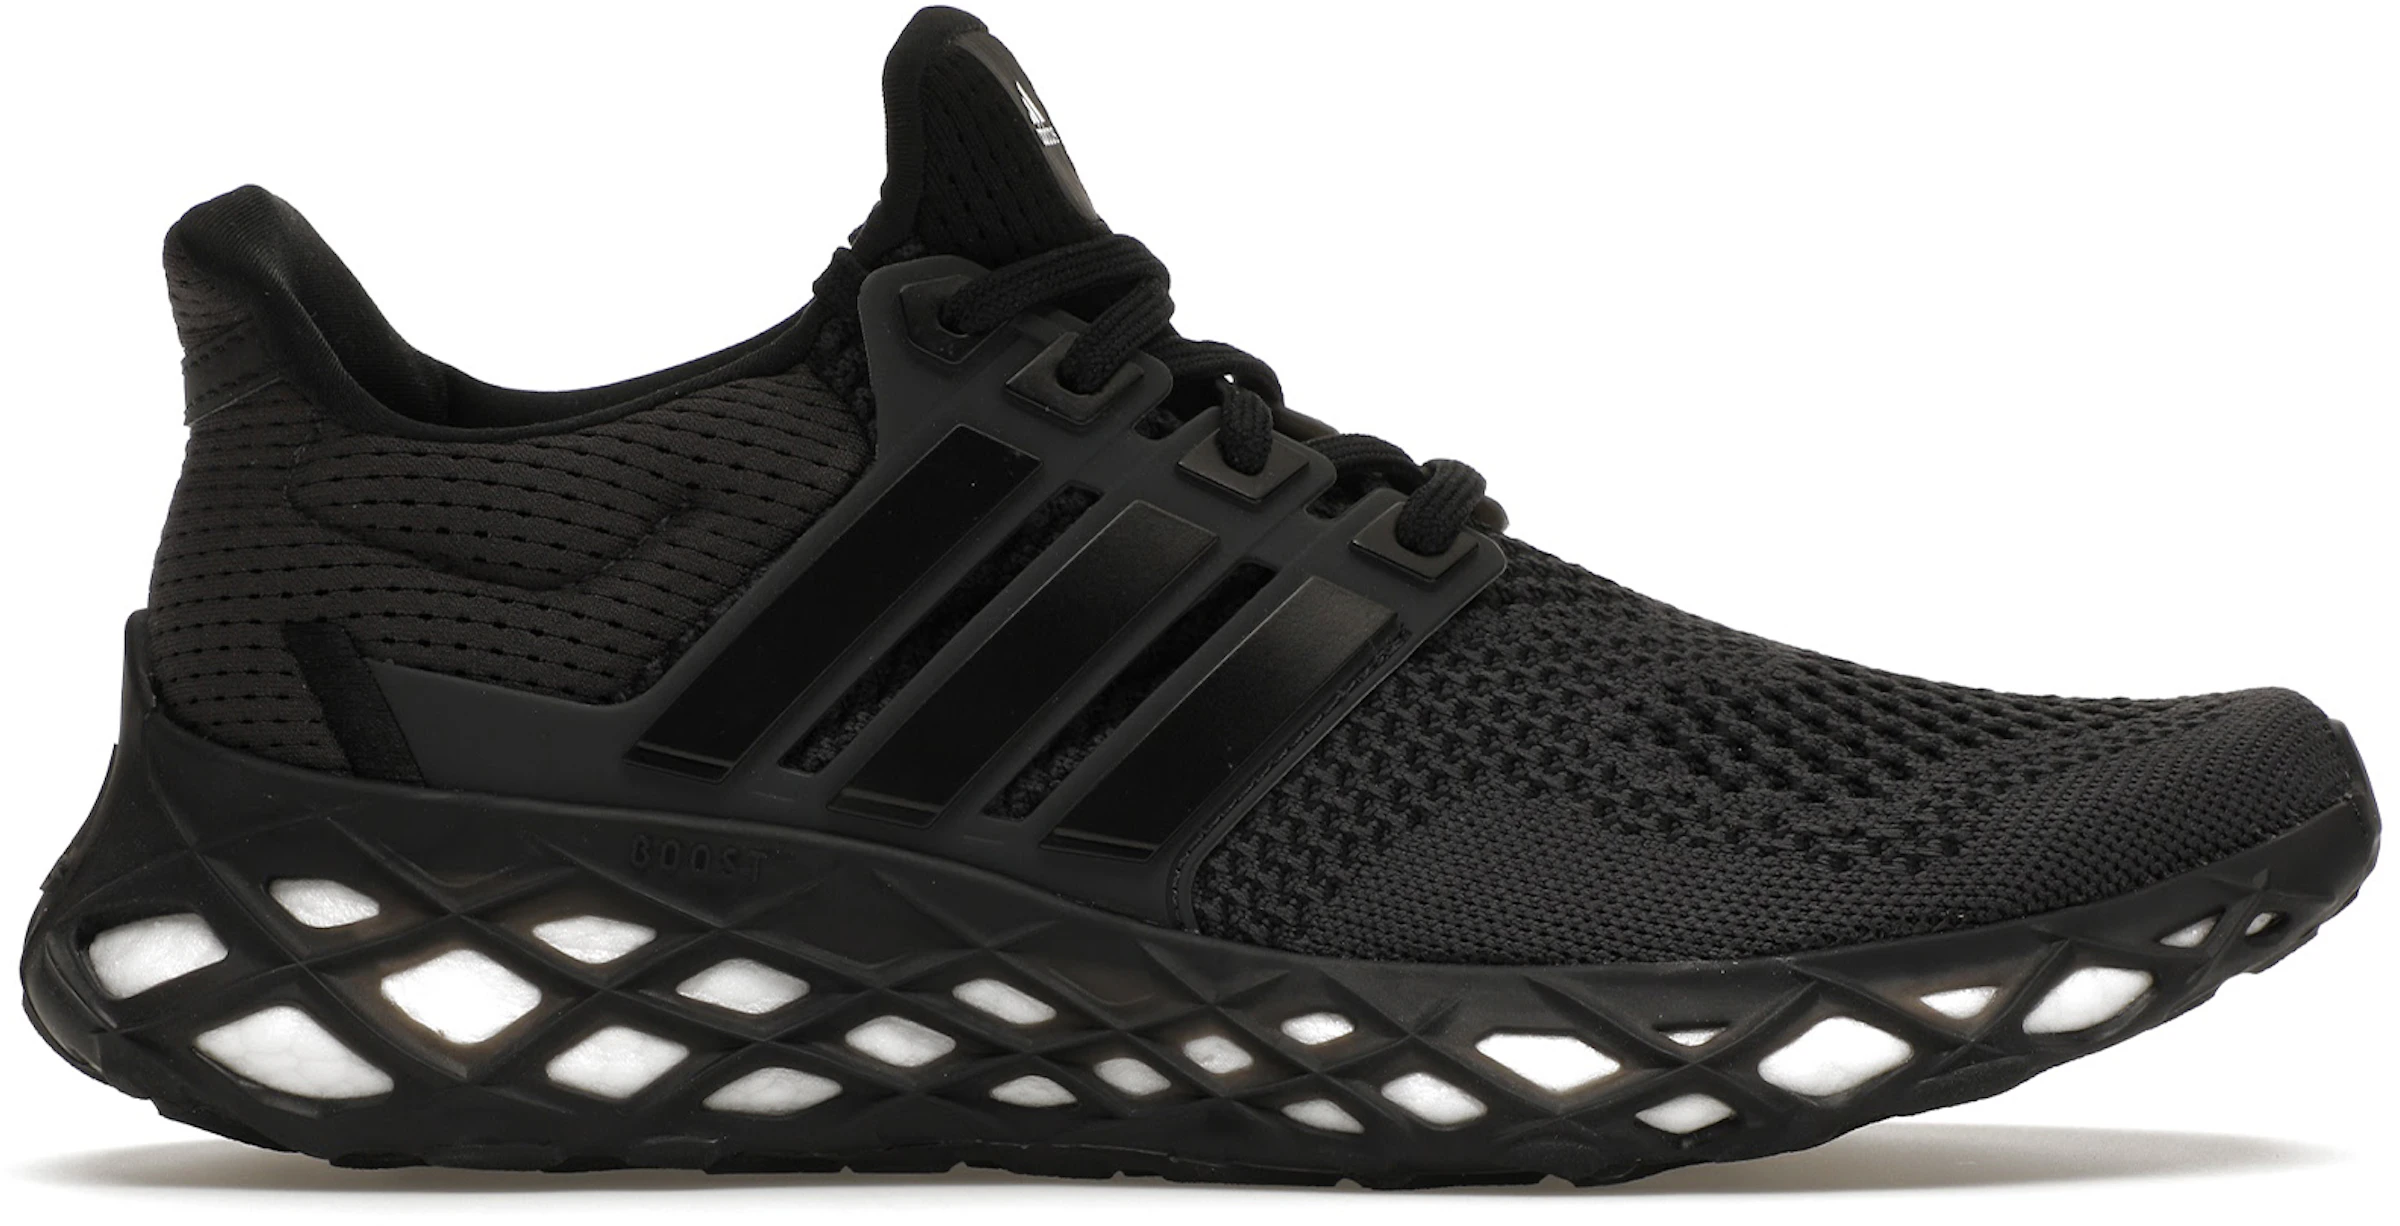 adidas Ultra Boost Web DNA Black White - GY4173 - US